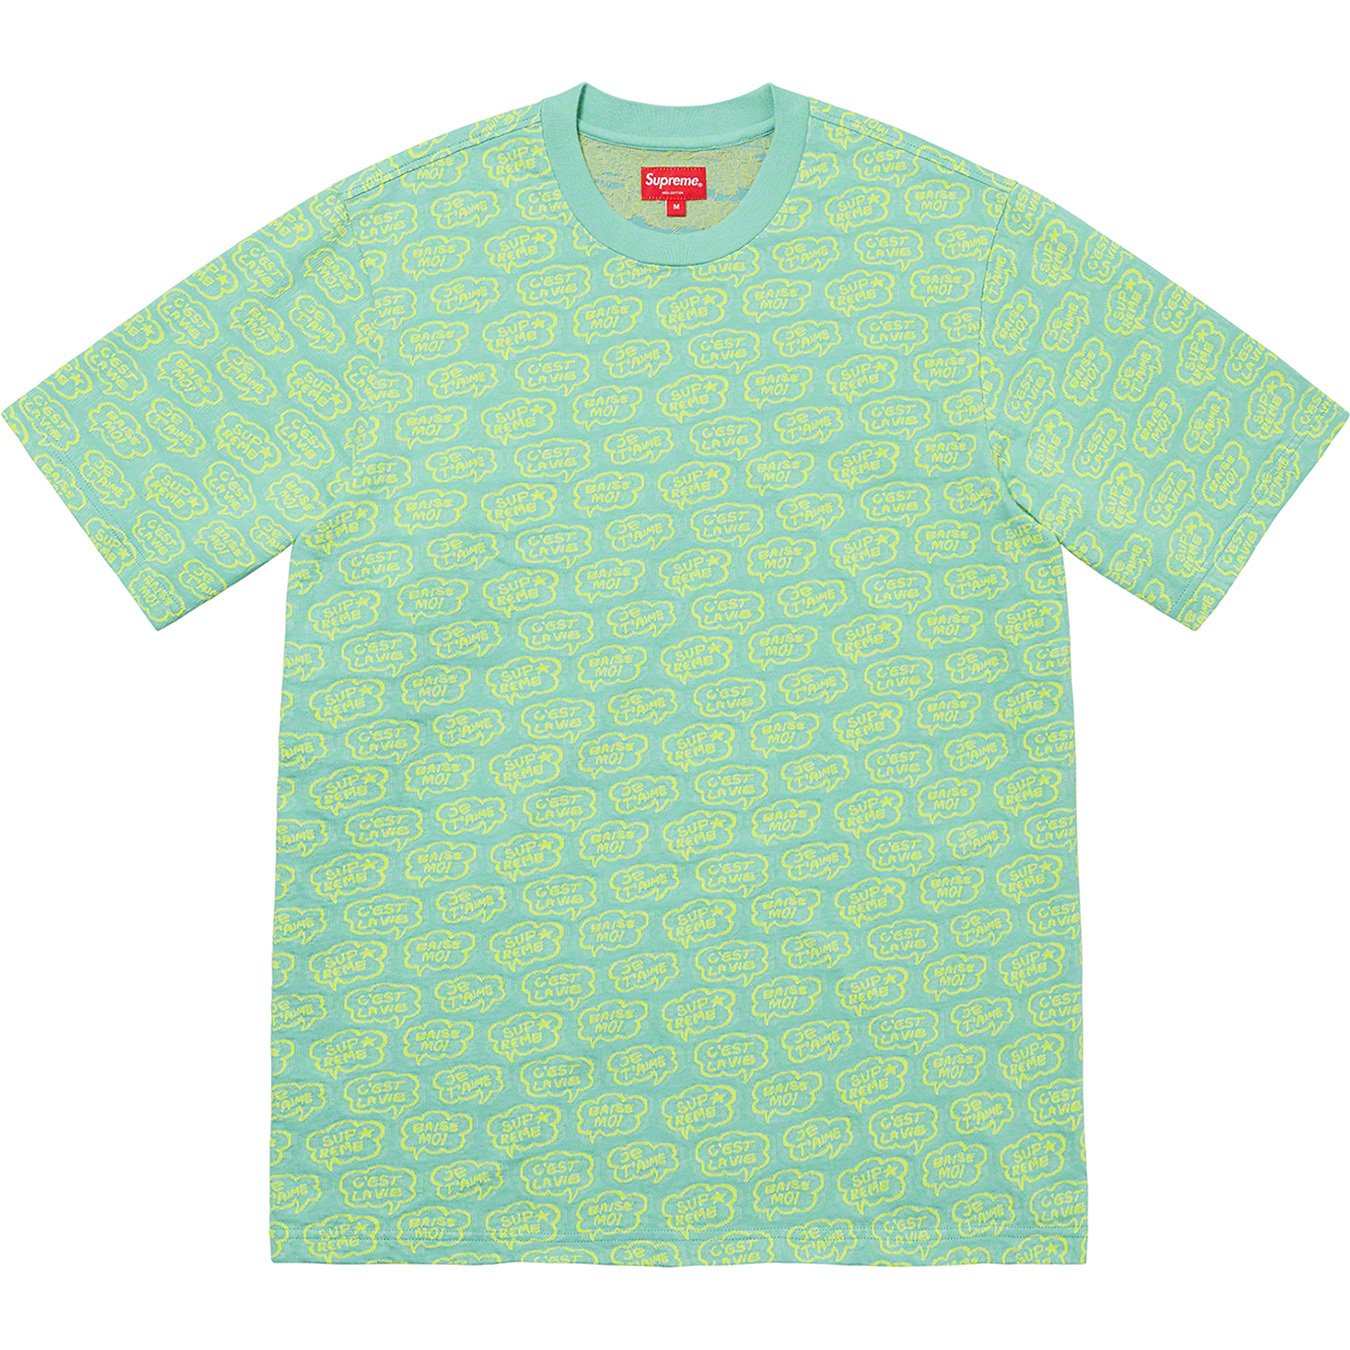 Word Bubble Jacquard S S Top - spring summer 2022 - Supreme